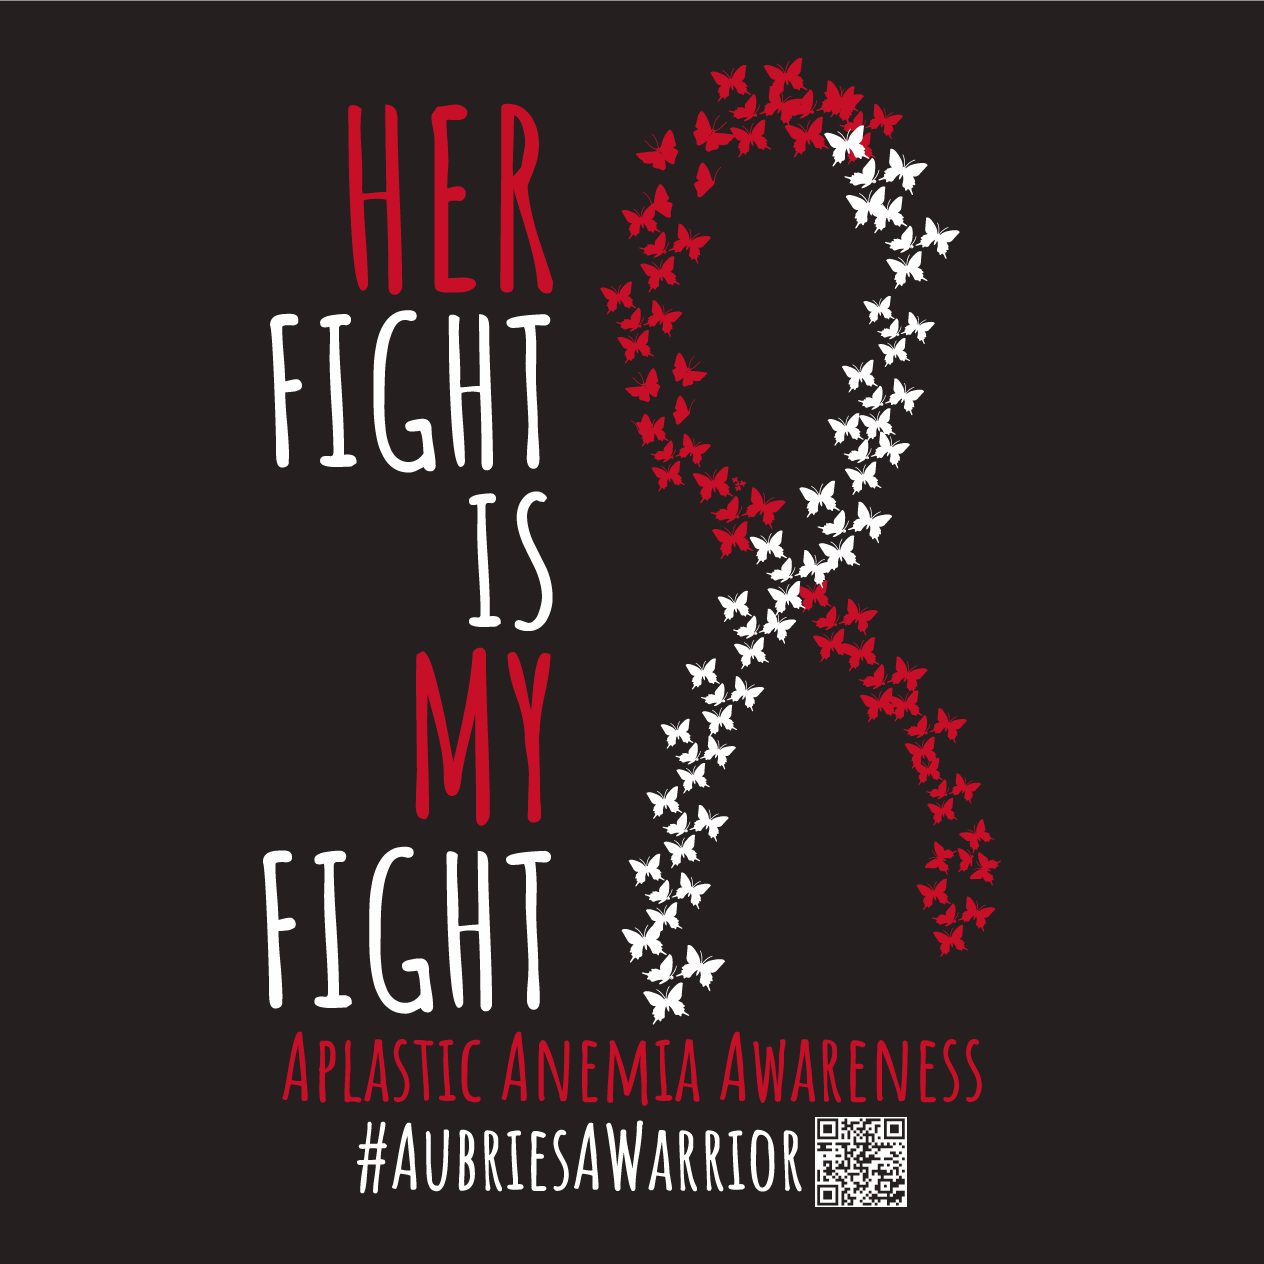 Aubrie's A Warrior Aplastic Anemia Fundraiser shirt design - zoomed